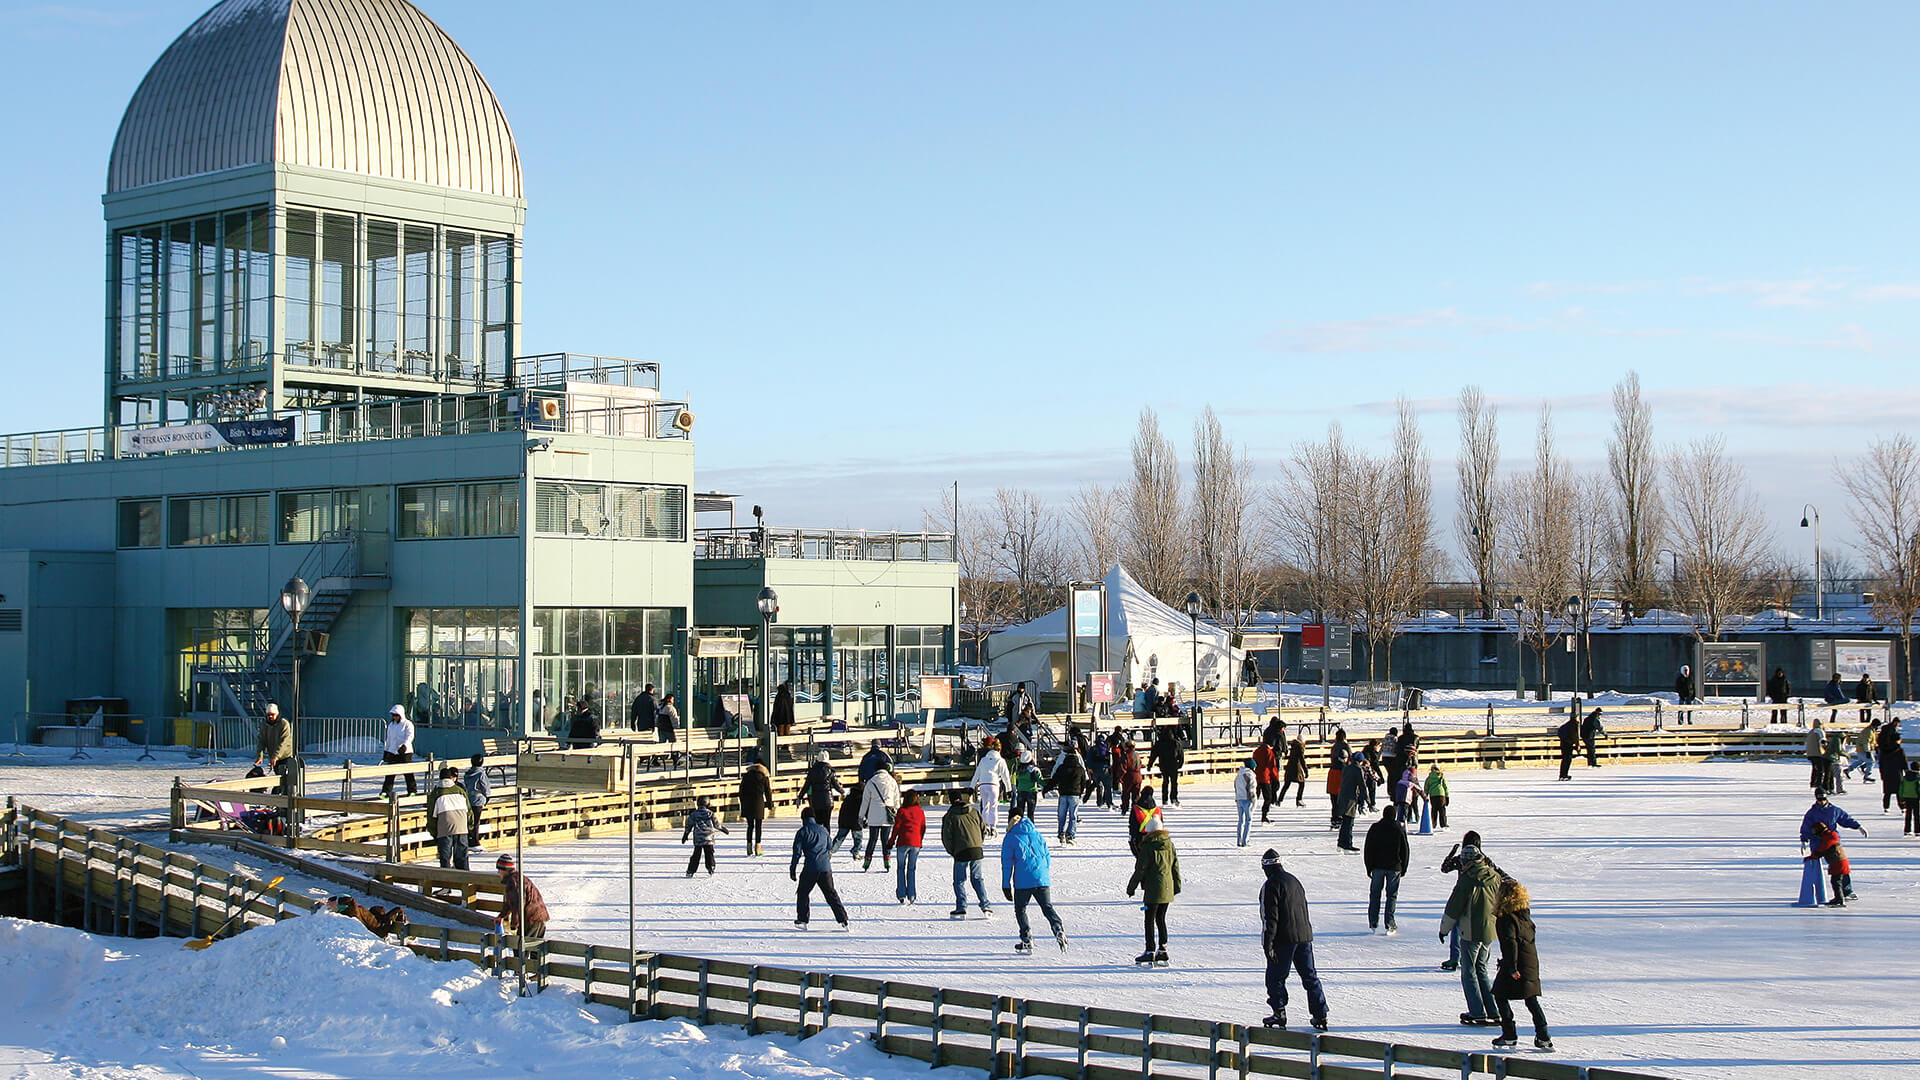 People of various ages enjoy ice skating on a large outdoor rink beside a modern building under a clear blue sky.